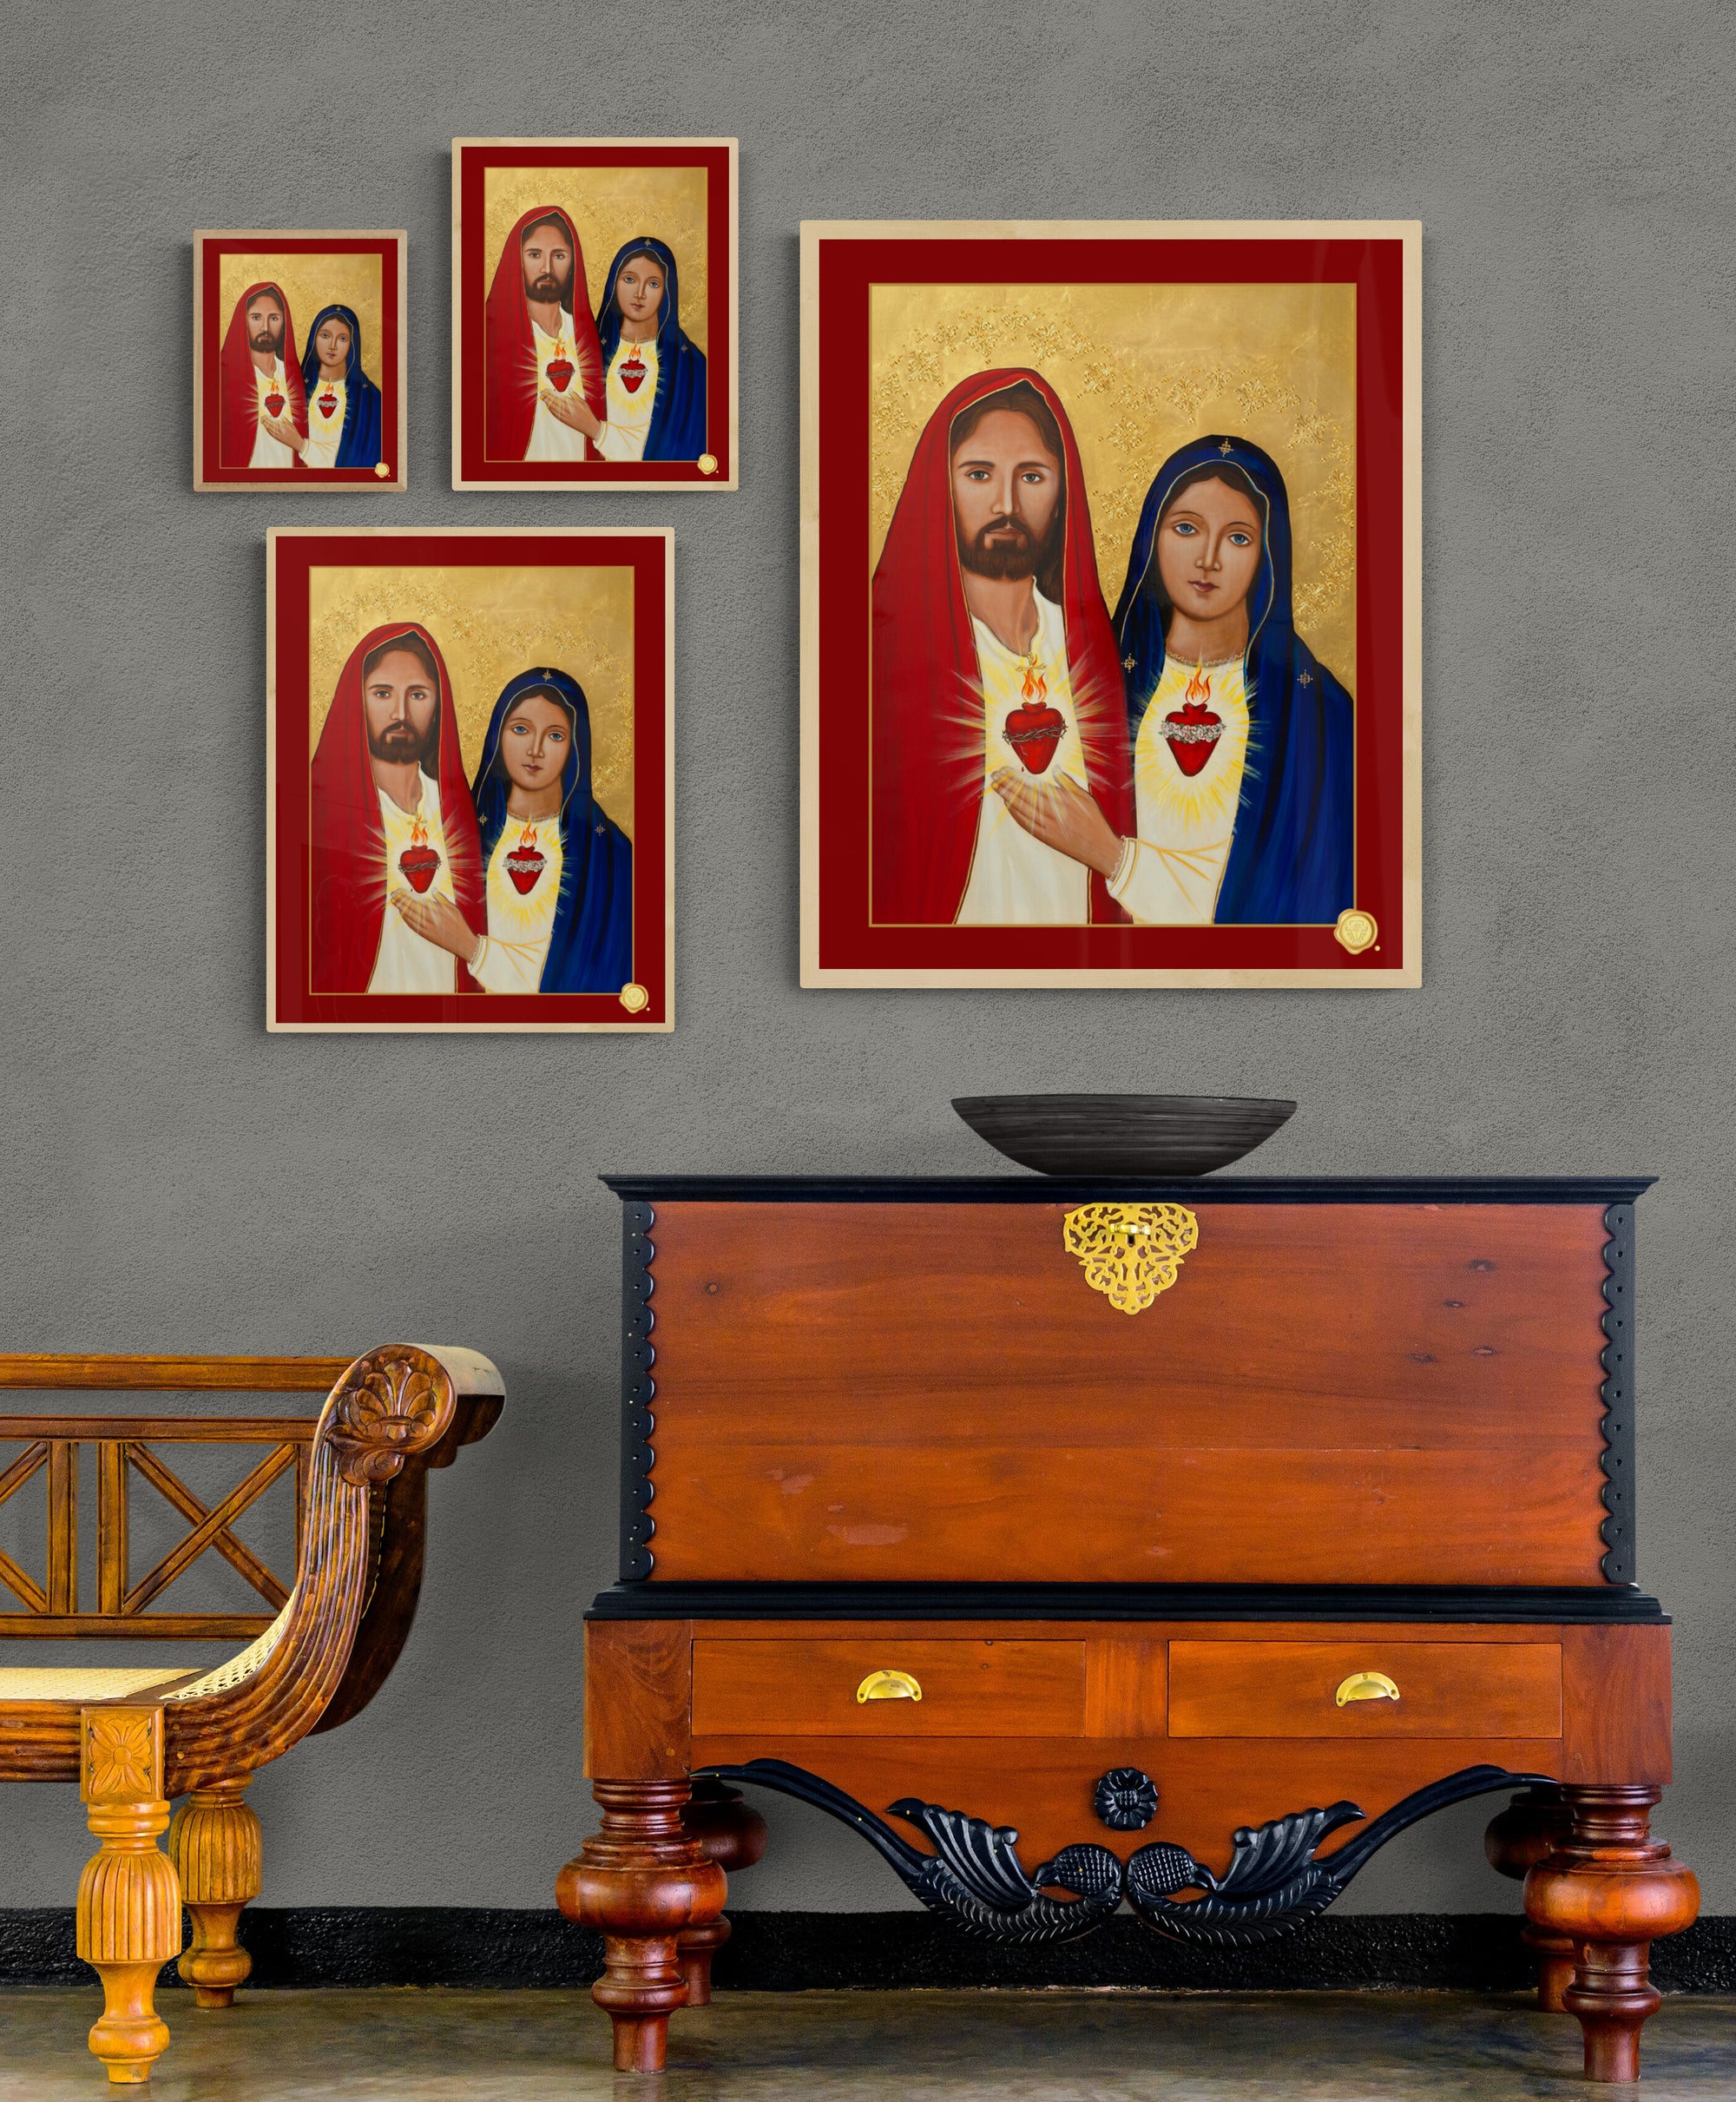 Sacred and Immaculate Hearts 1 Icon Print